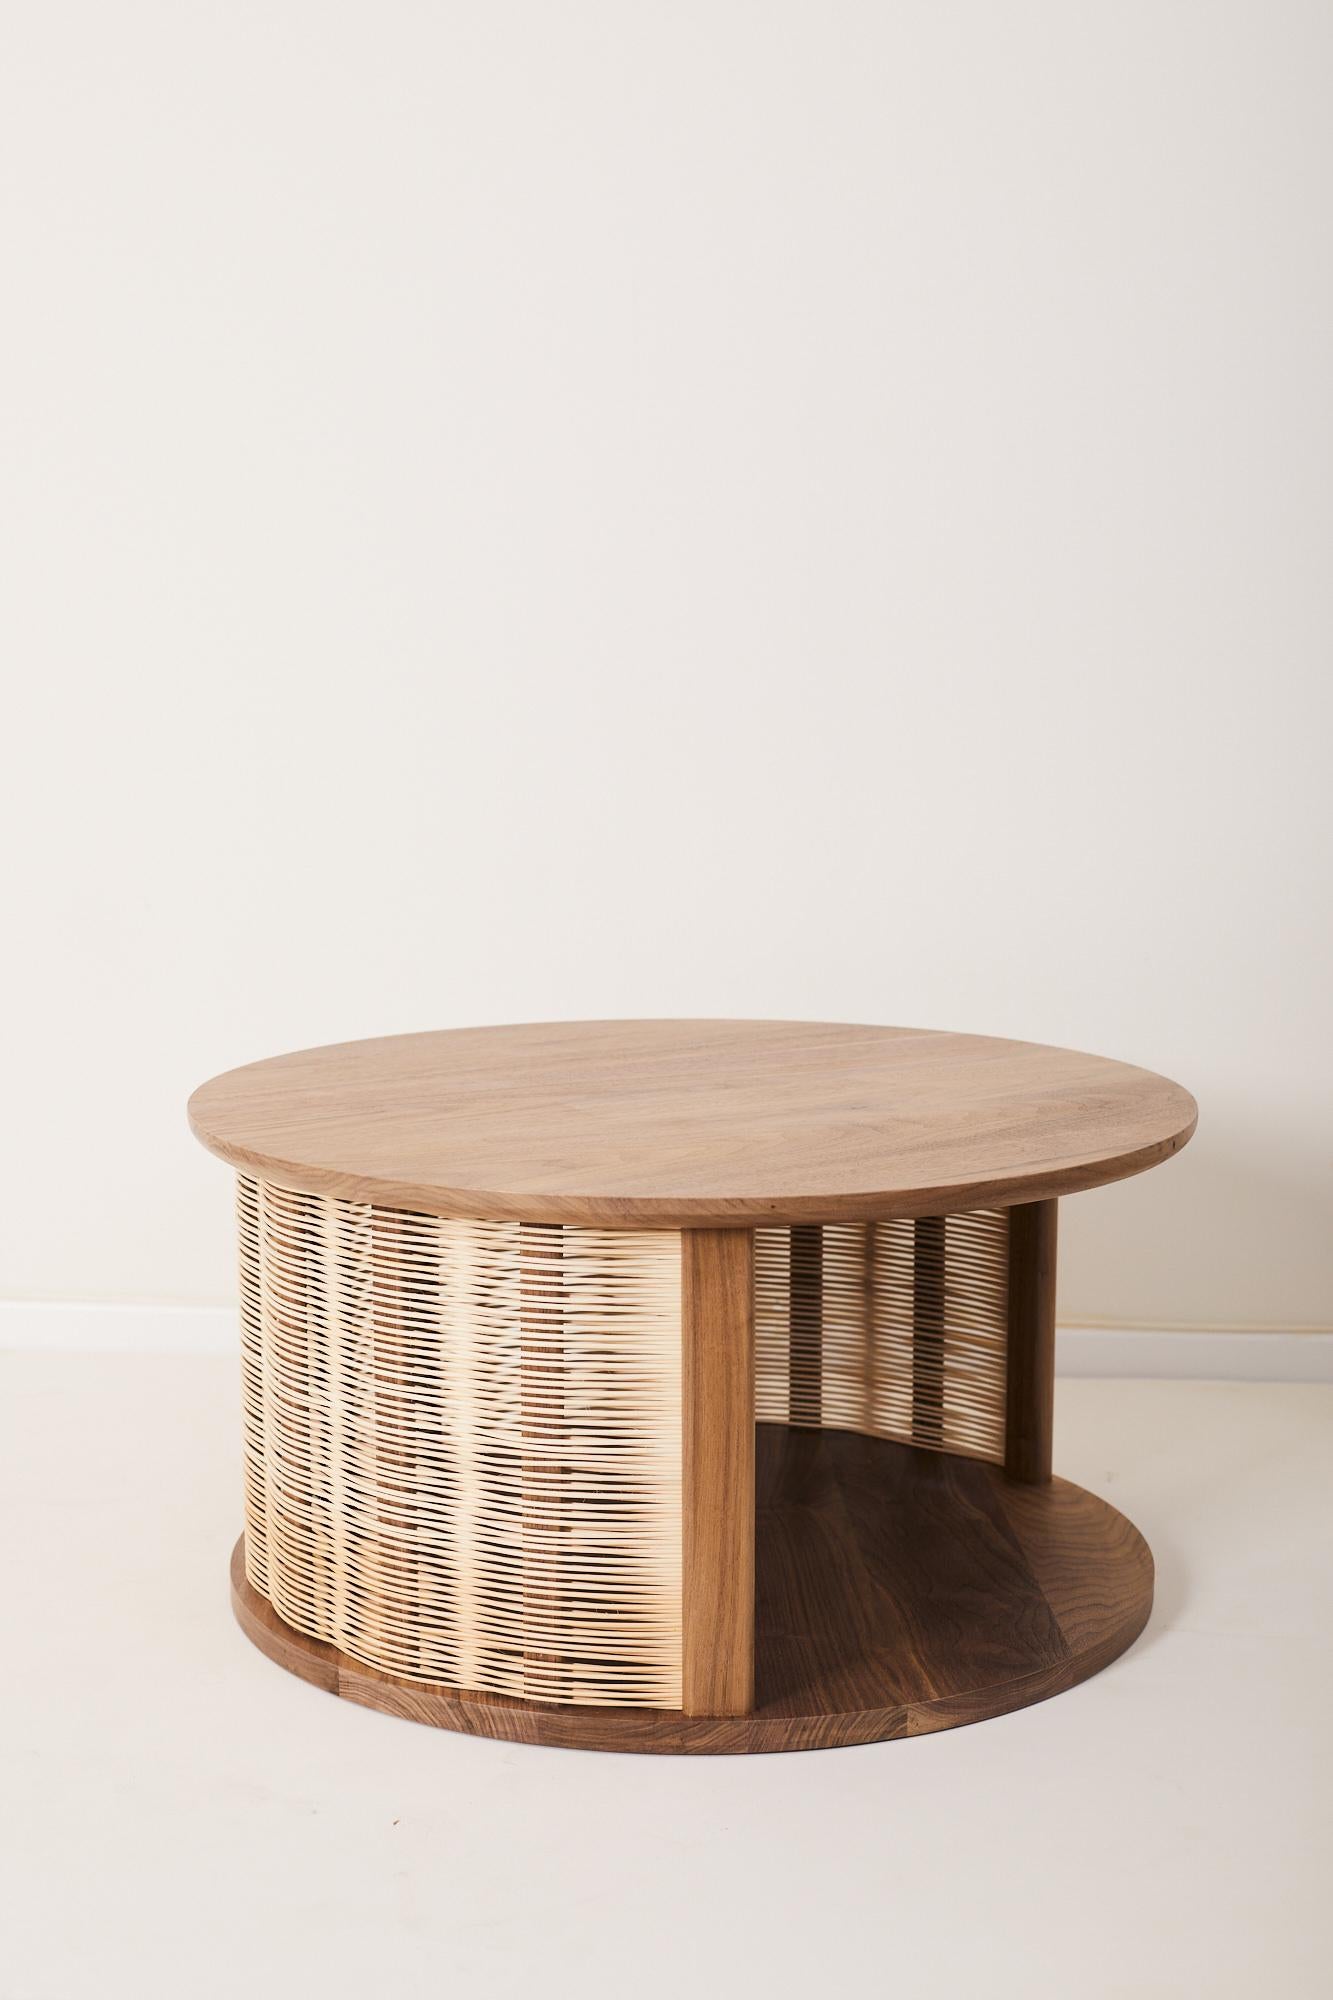 Coffee table with softly rounded tabletop.
The side of the table is woven with natural wicker and partially open for storage.

Drawing inspiration from the rich heritage of the traditional wicker weaving technique, designer Nadav Caspi has